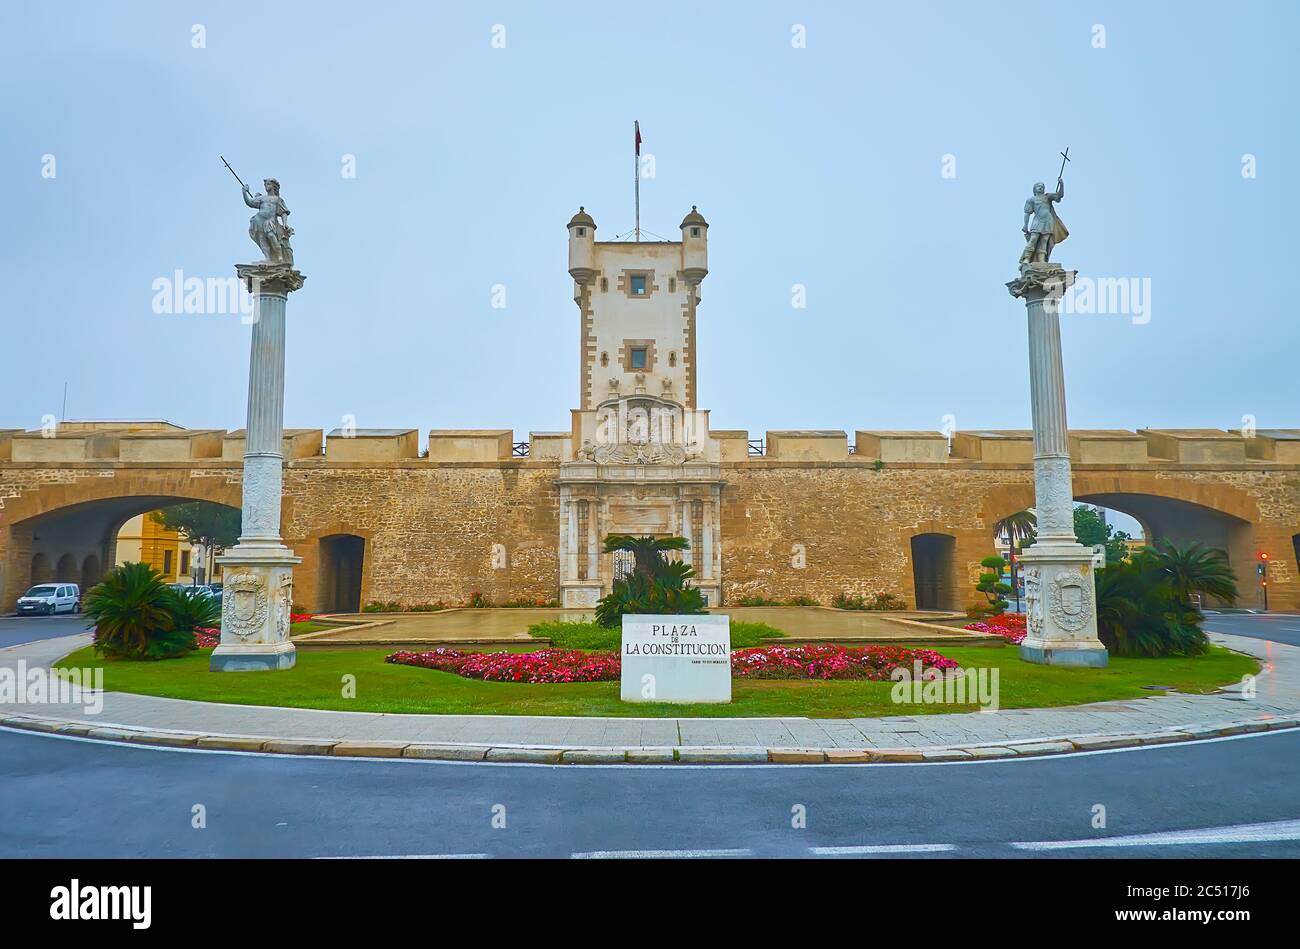 The Plaza de la Constitucion (Constitution Square) with Earthen Gate (Earth Doors, Puertas de Tierra), tower, rampart, white pillars with statues and Stock Photo